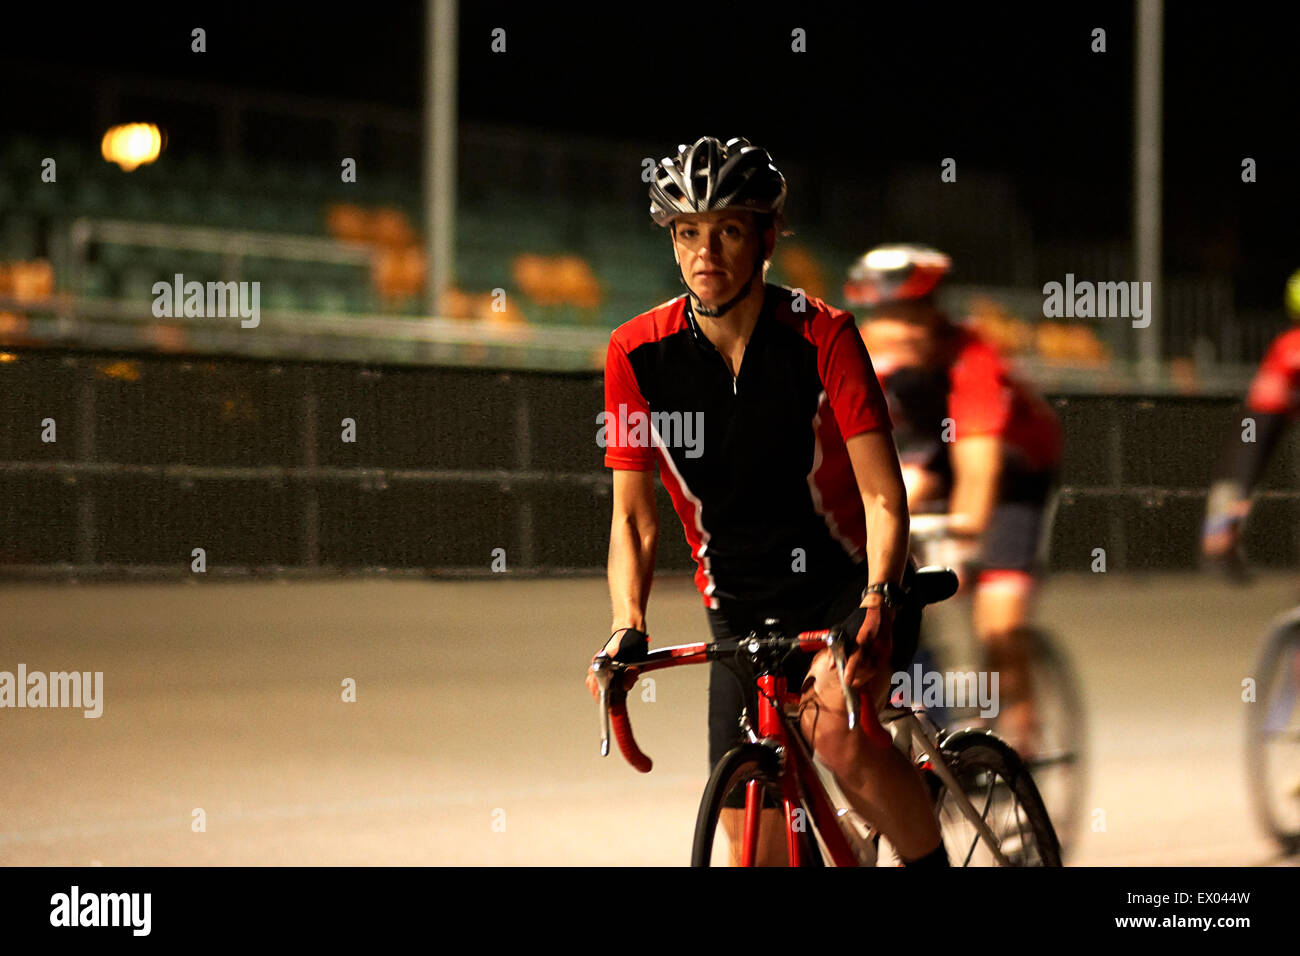 Cyclists cycling on track at velodrome Stock Photo